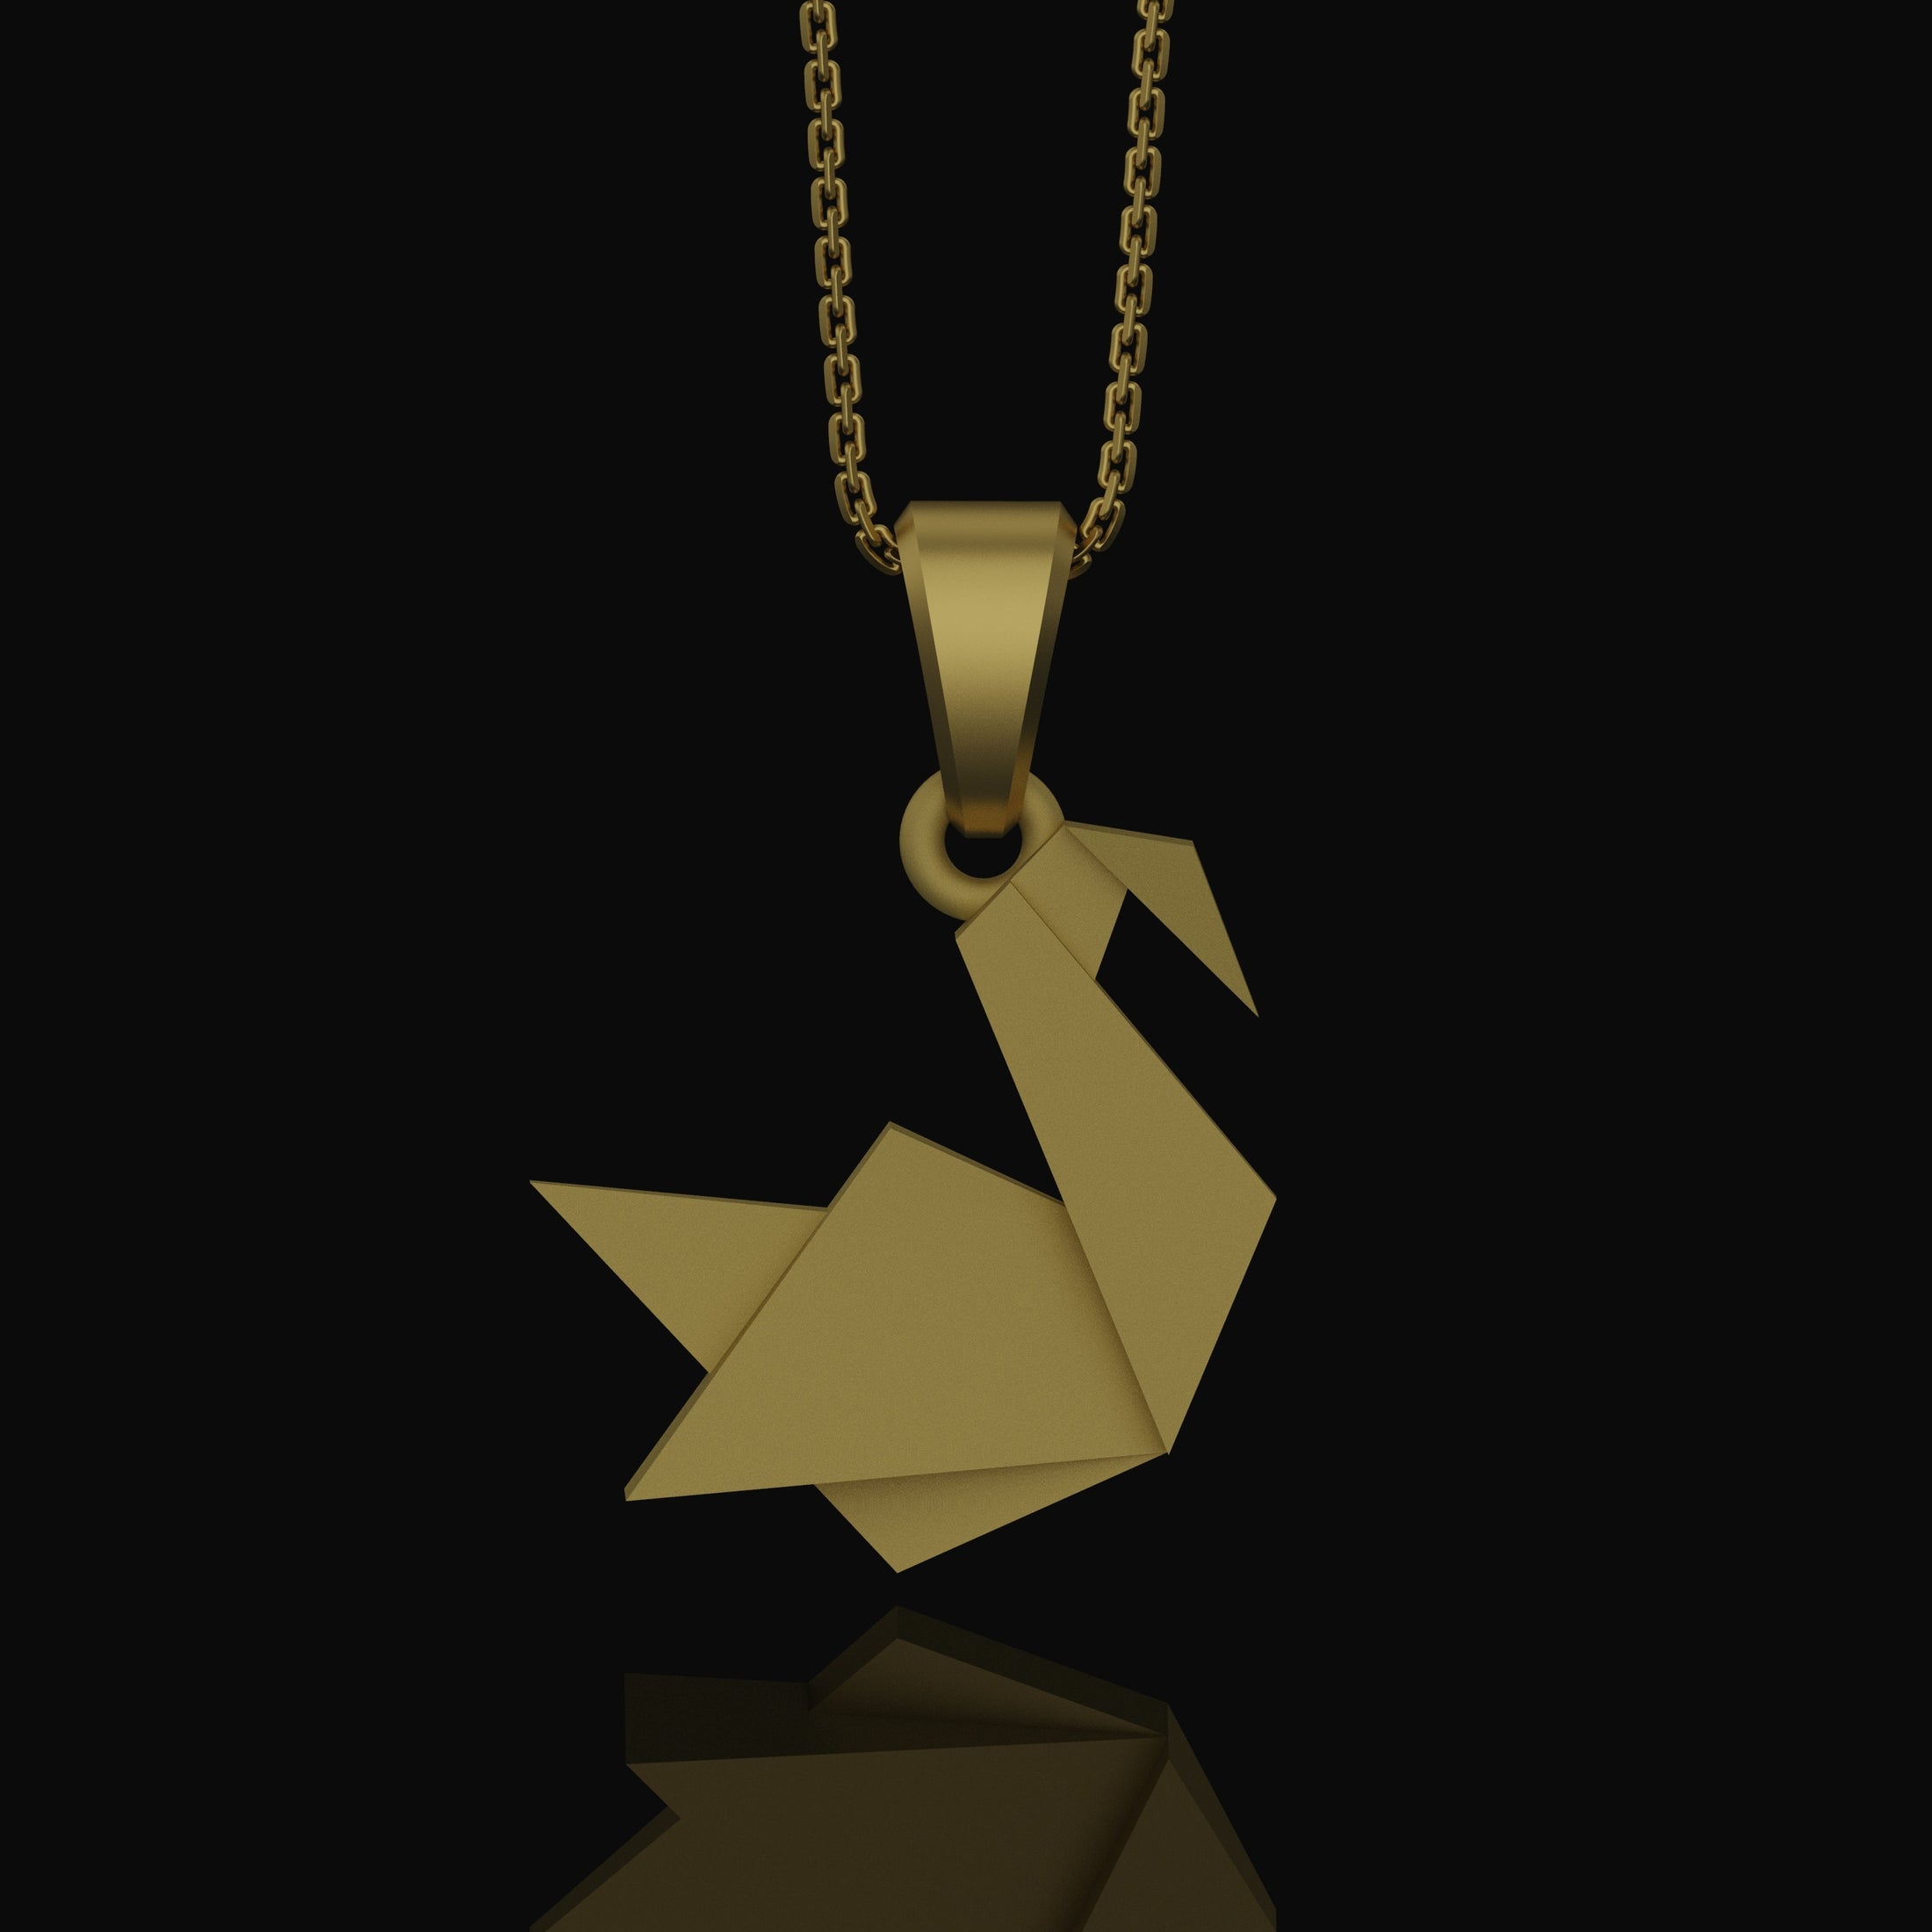 Silver Origami Swan Charm Necklace - Elegant Folded Swan Pendant, Chic and Artistic, Graceful Nature-Inspired Jewelry Gold Matte